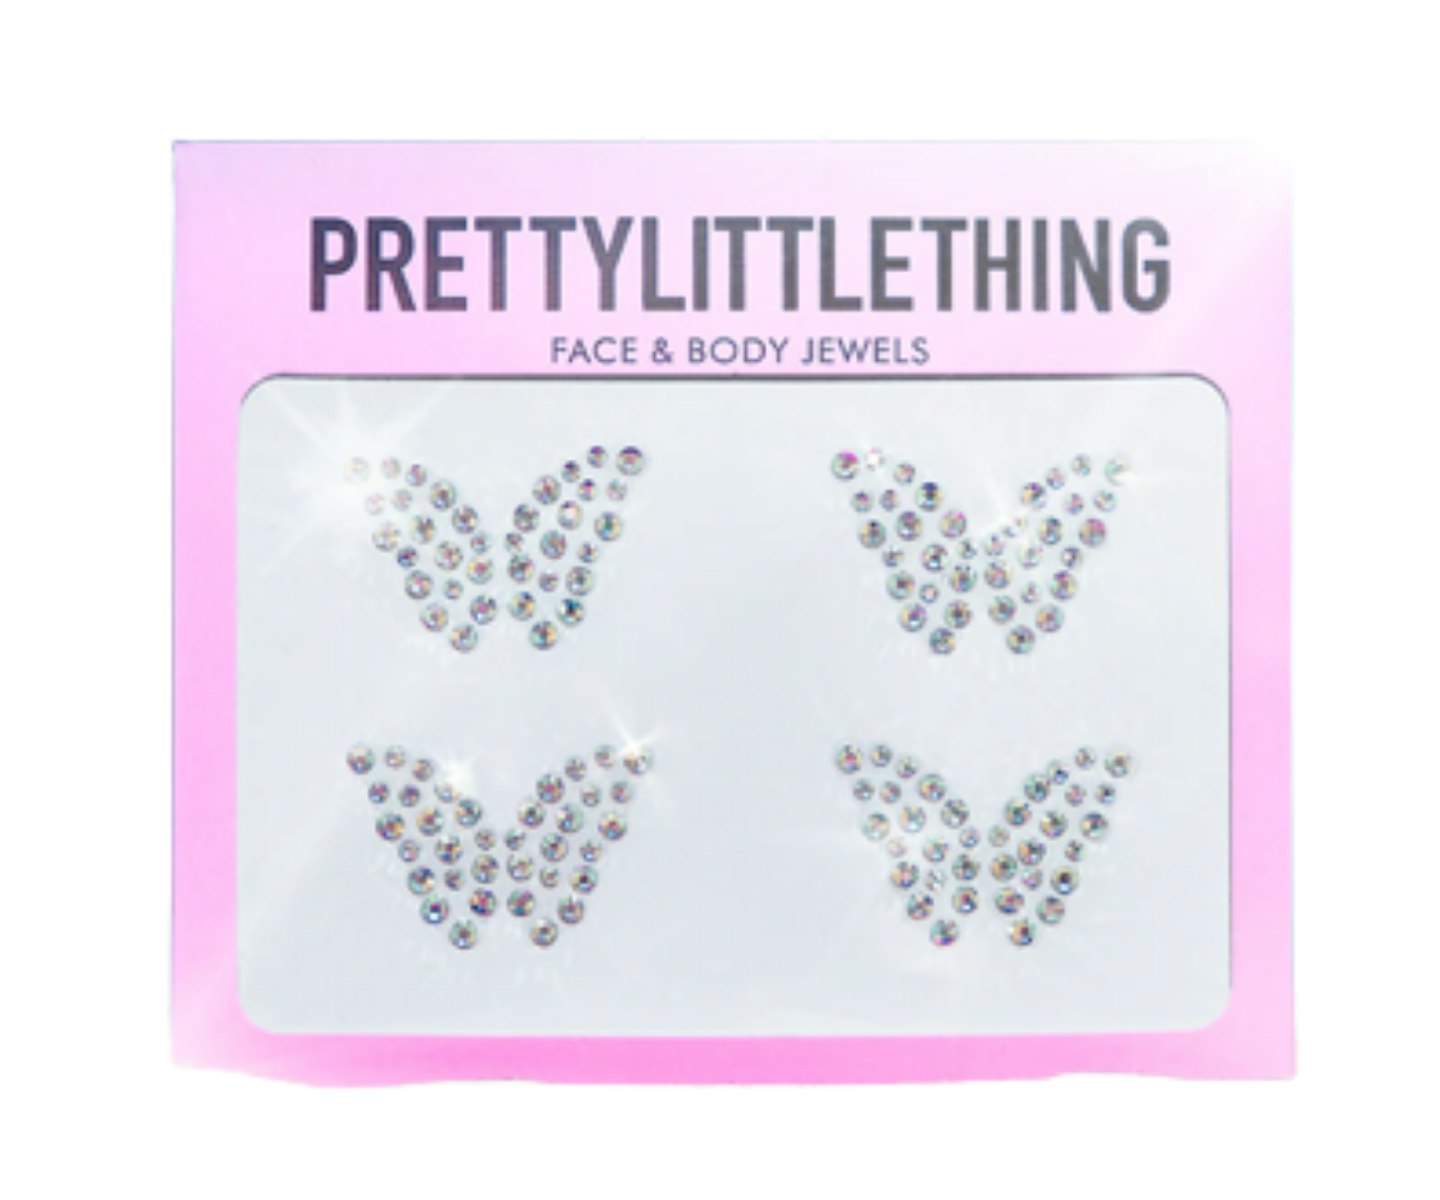 A picture of the Pretty Little Thing Butterfly Face and Body Jewels